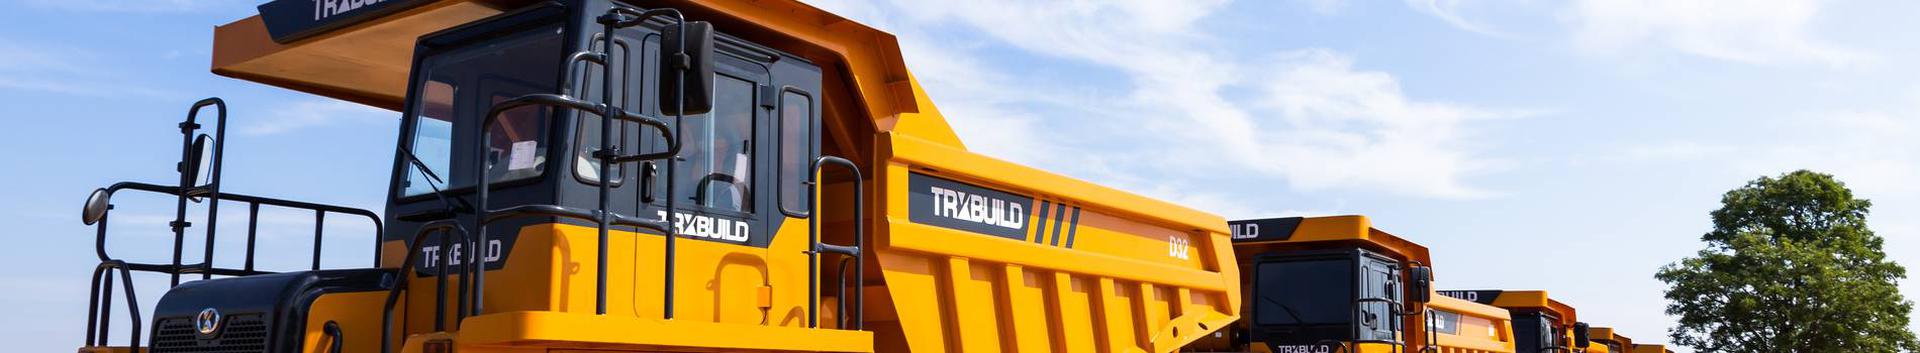 construction machinery and tools, Construction machinery and tools, machinery for construction, construction tools, machinery and tools, Bulldozers, Mechanical excavators, construction and real estate